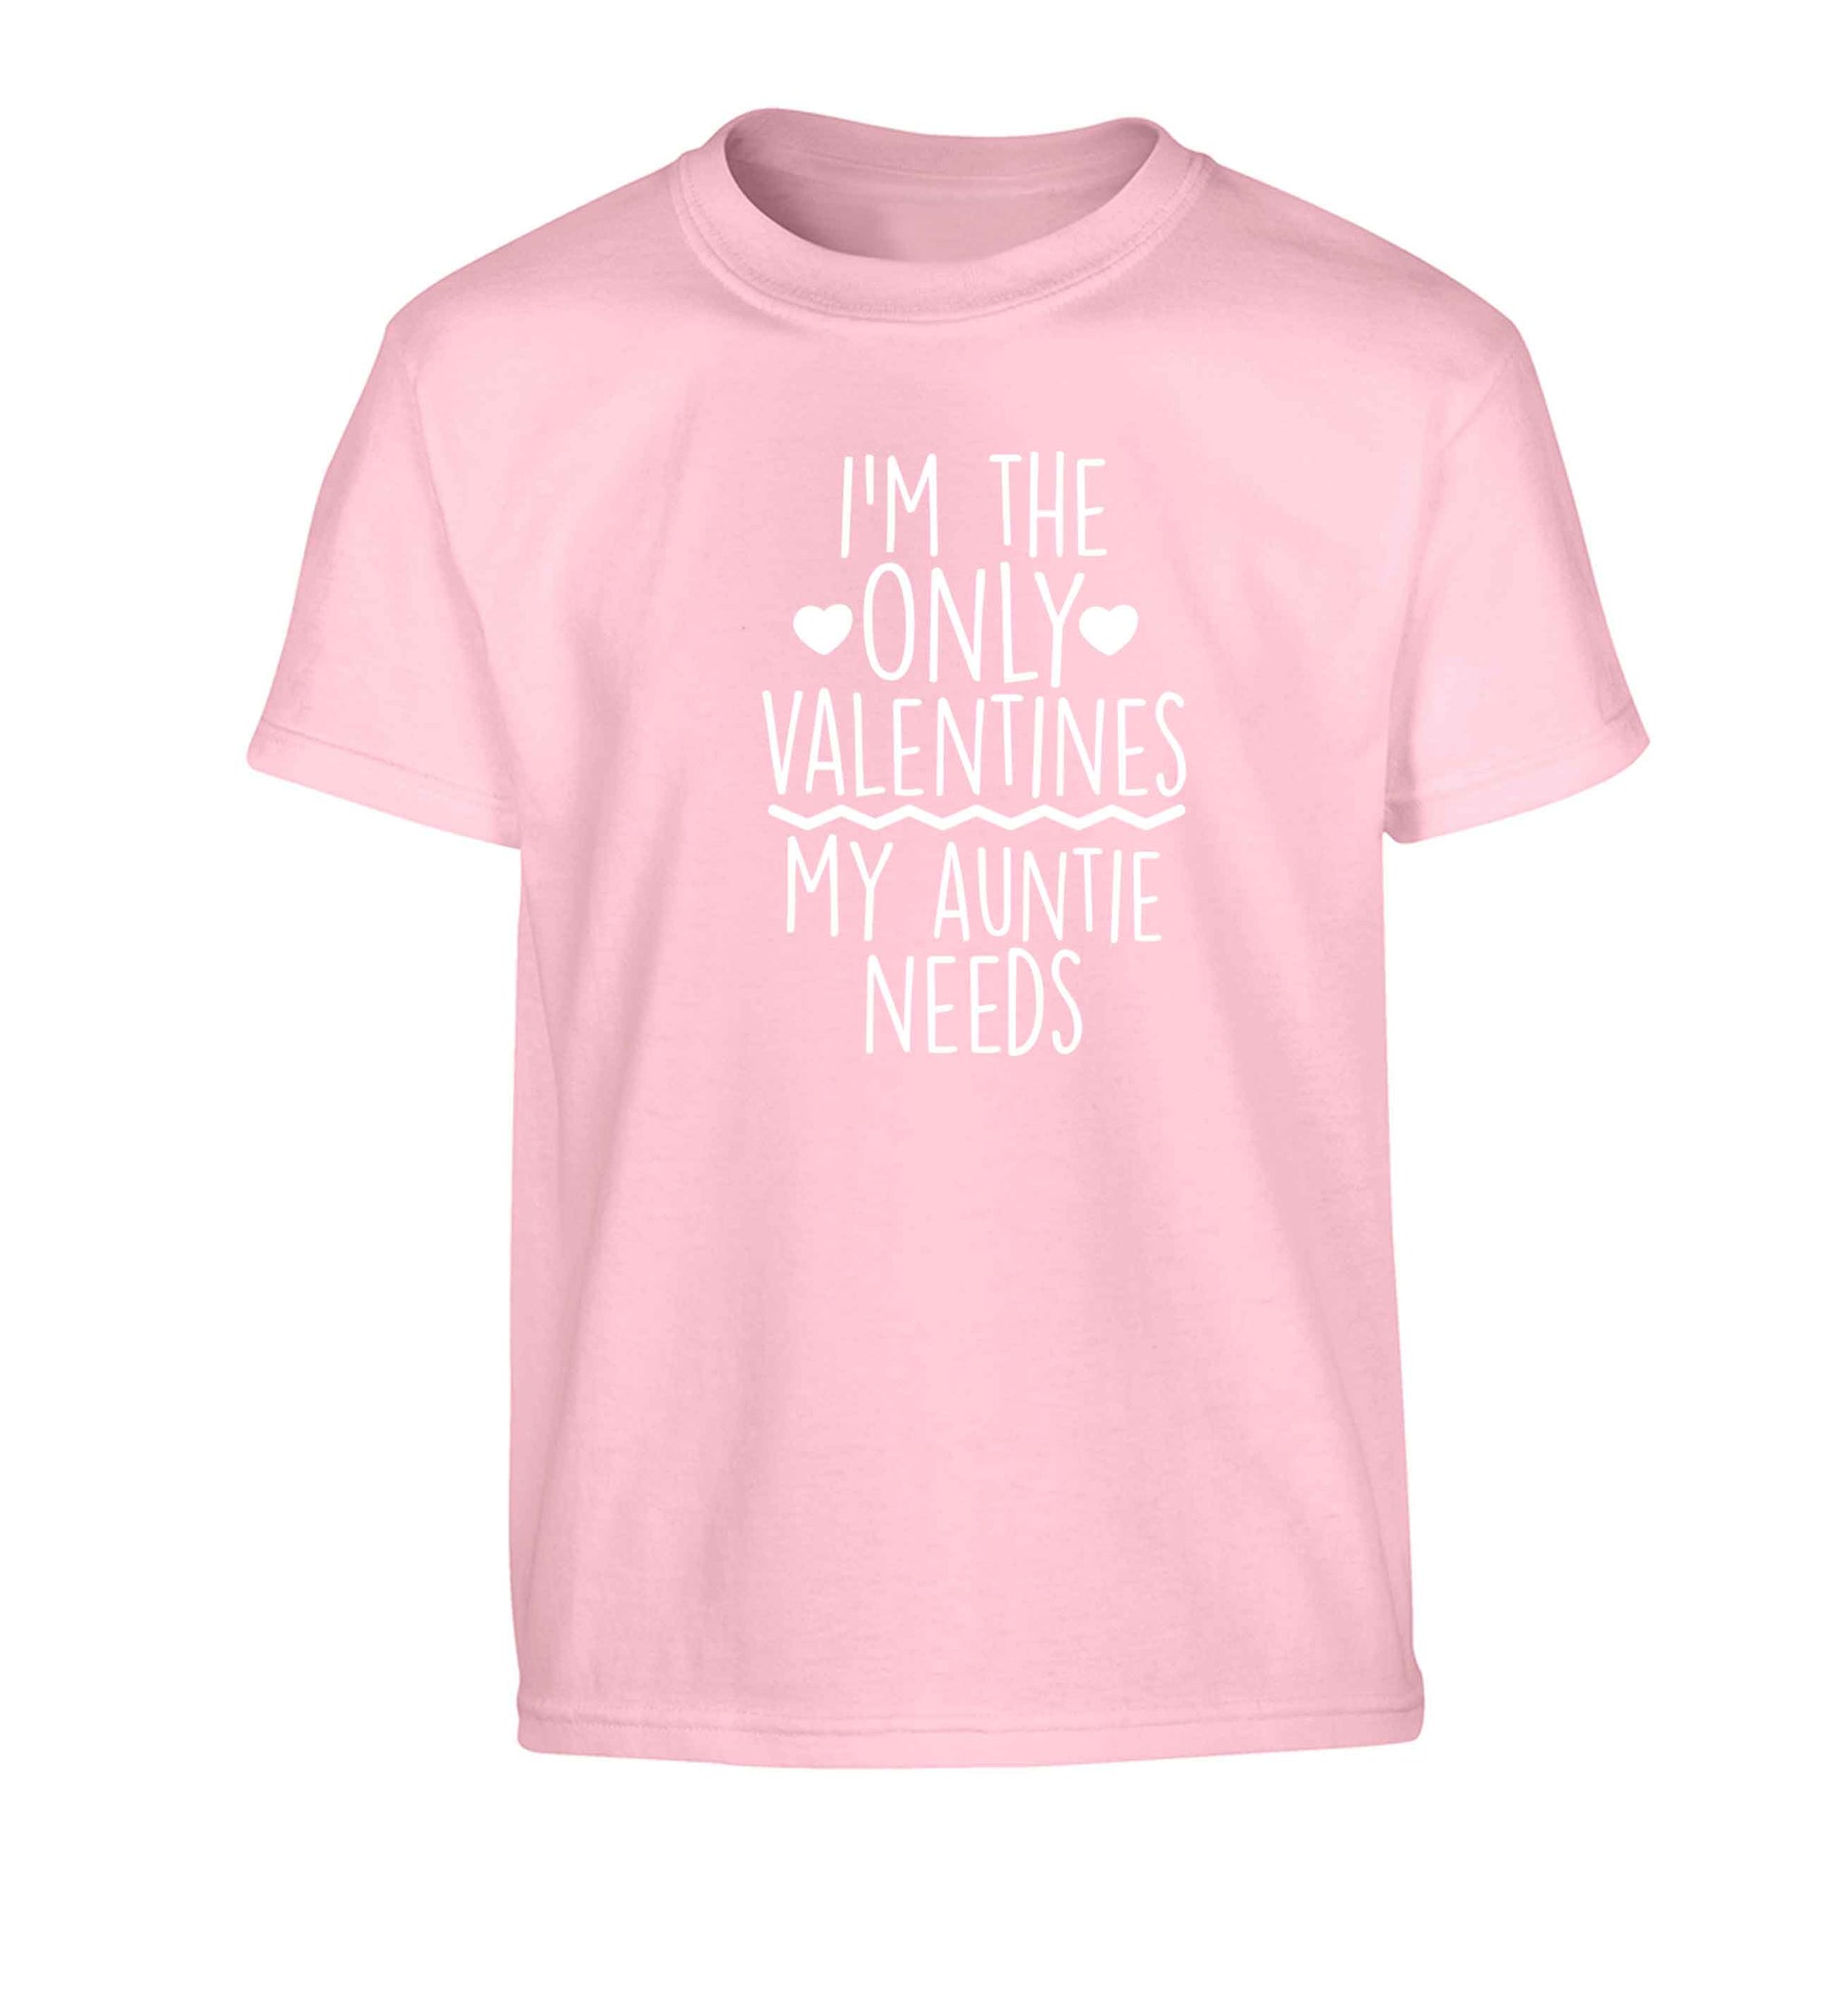 I'm the only valentines my auntie needs Children's light pink Tshirt 12-13 Years